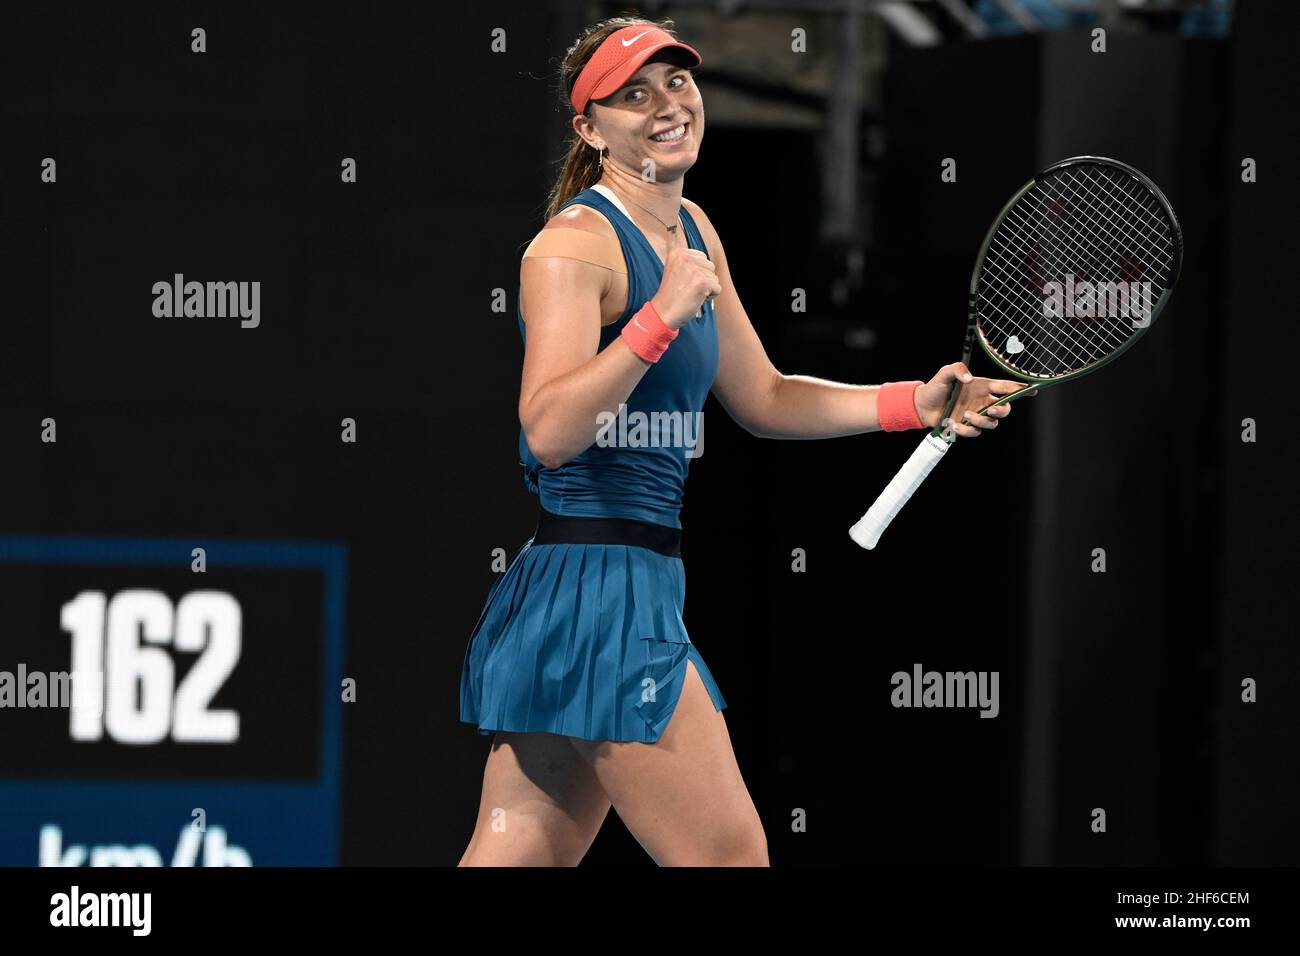 14th January 2022: Ken Rosewall Arena, Sydney Olympic Park, Sydney, Australia; Sydney Tennis Classic, Day 6 Semi Final: Paula Badosa of Spain reacts after winning a point in her match against Paula Badosa of Spain Stock Photo